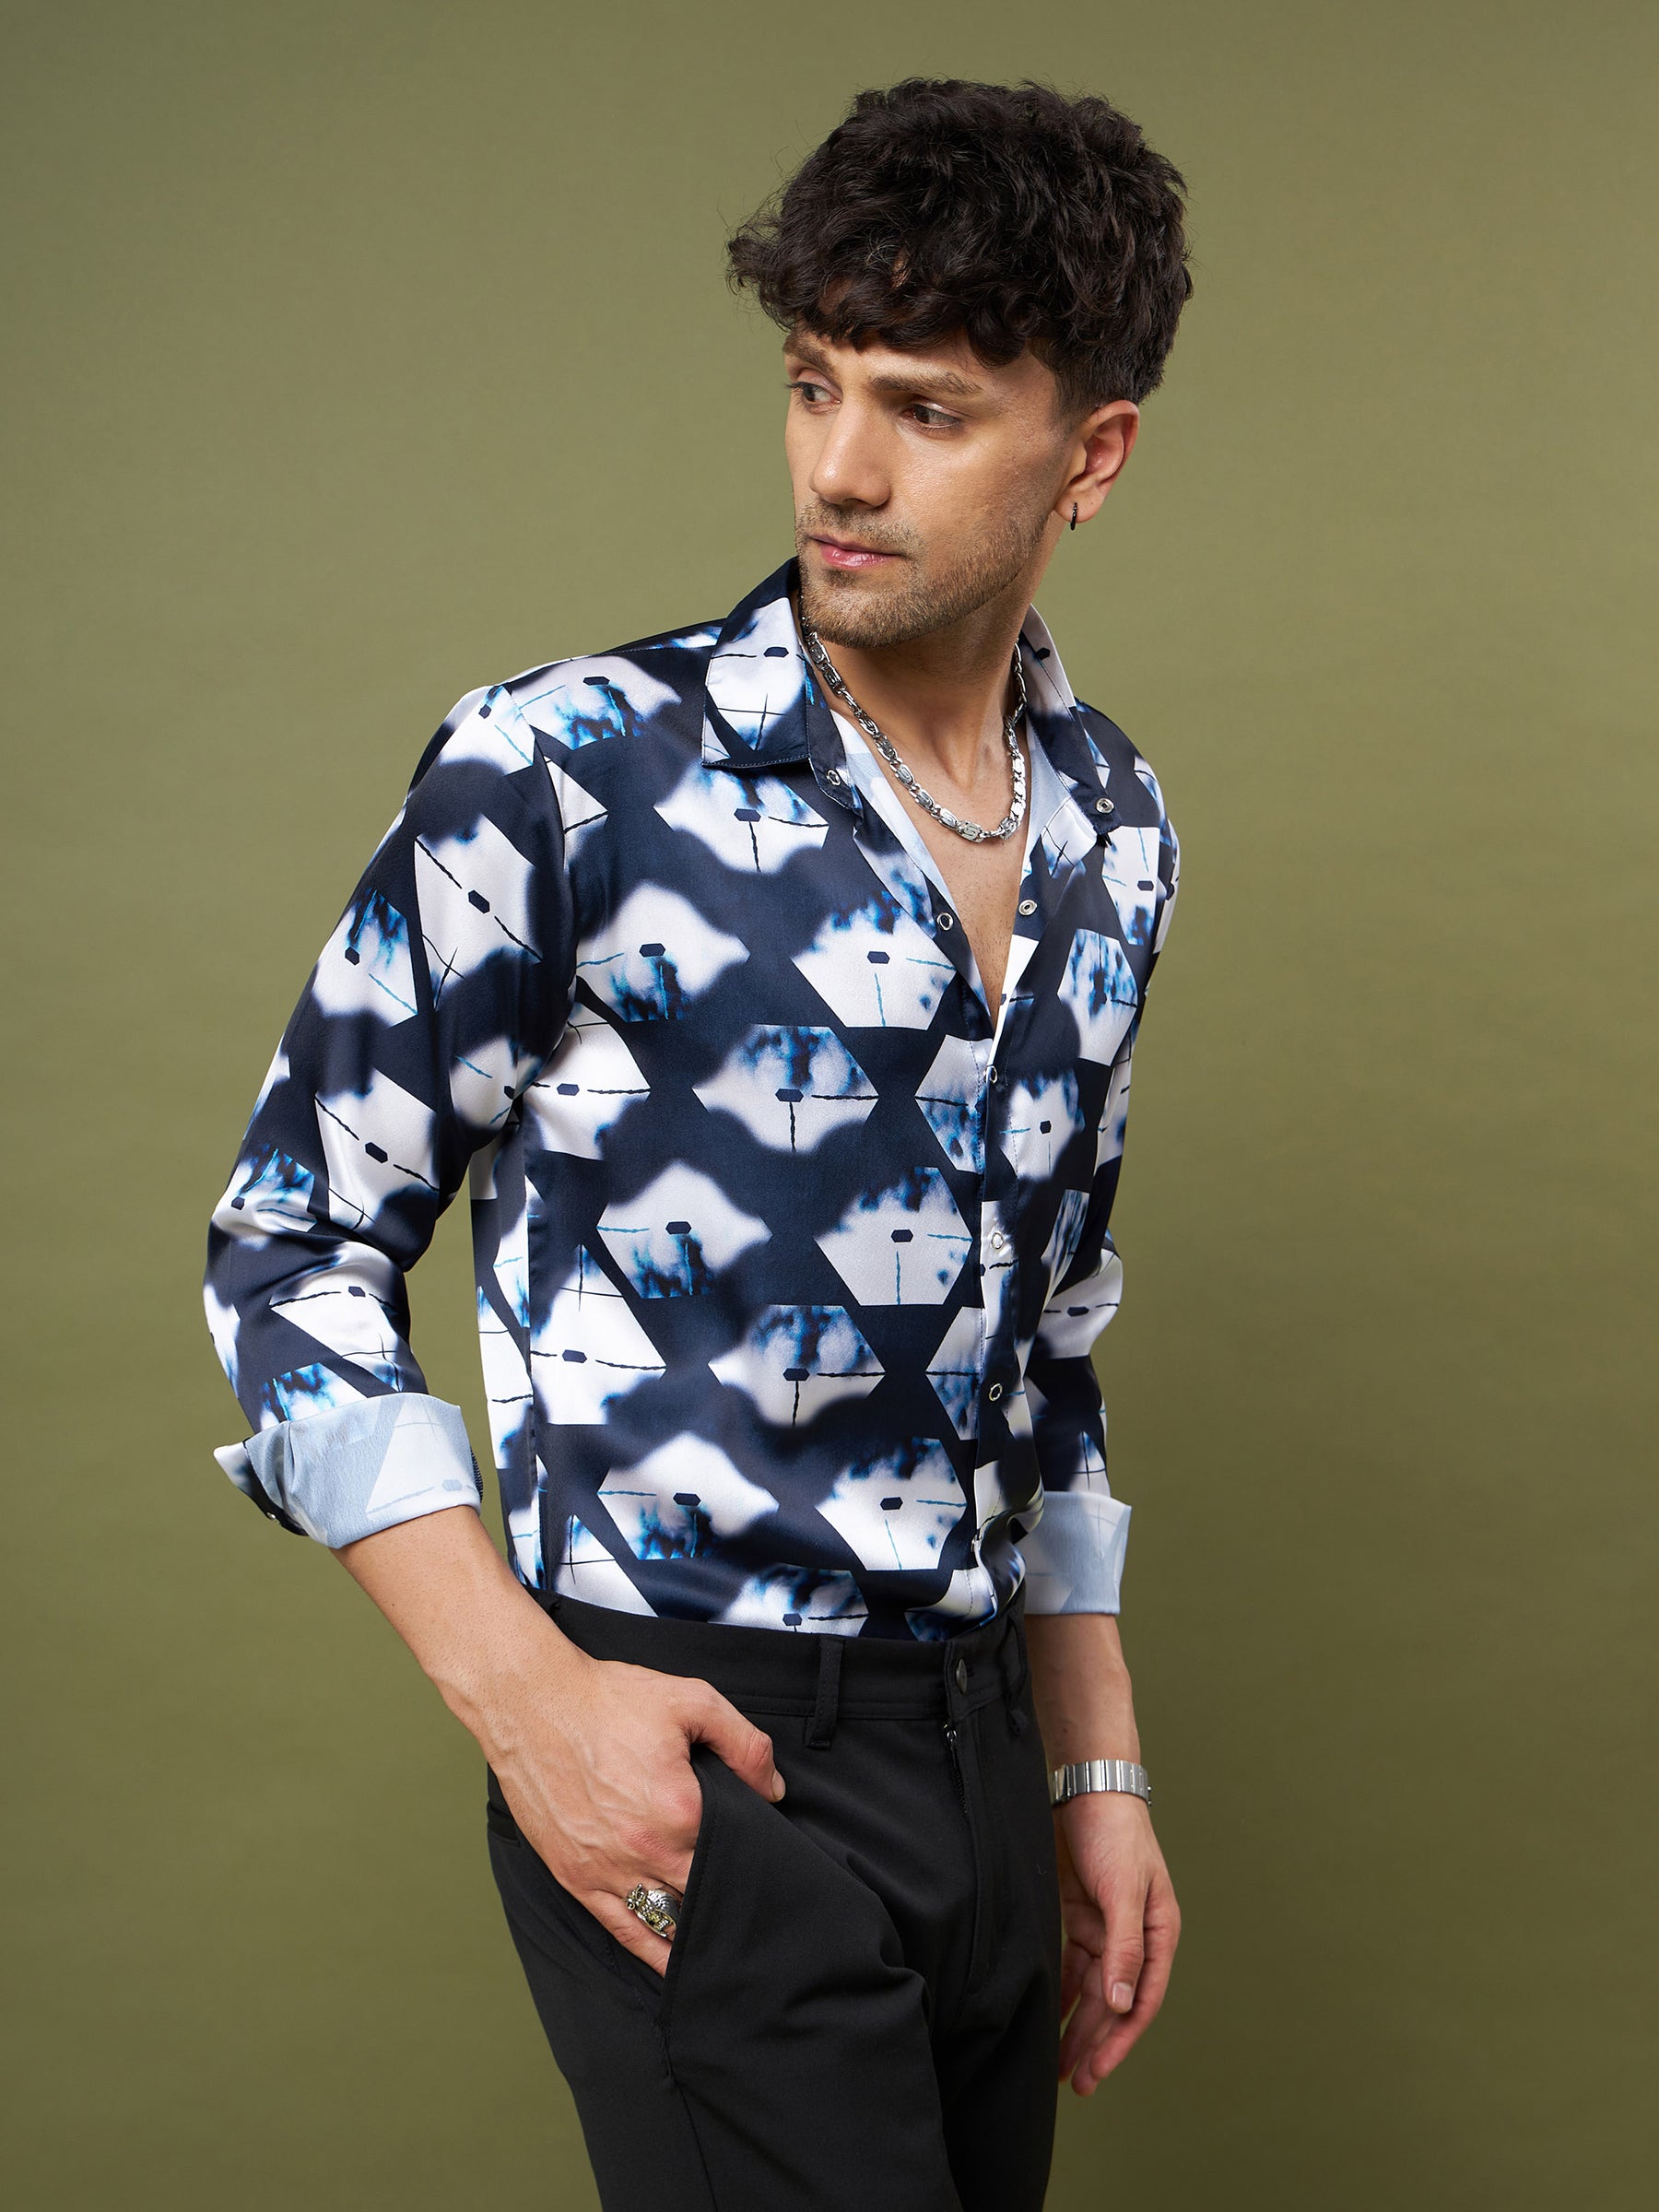 Unisex Navy & White Abstract Satin Relax Fit Shirt